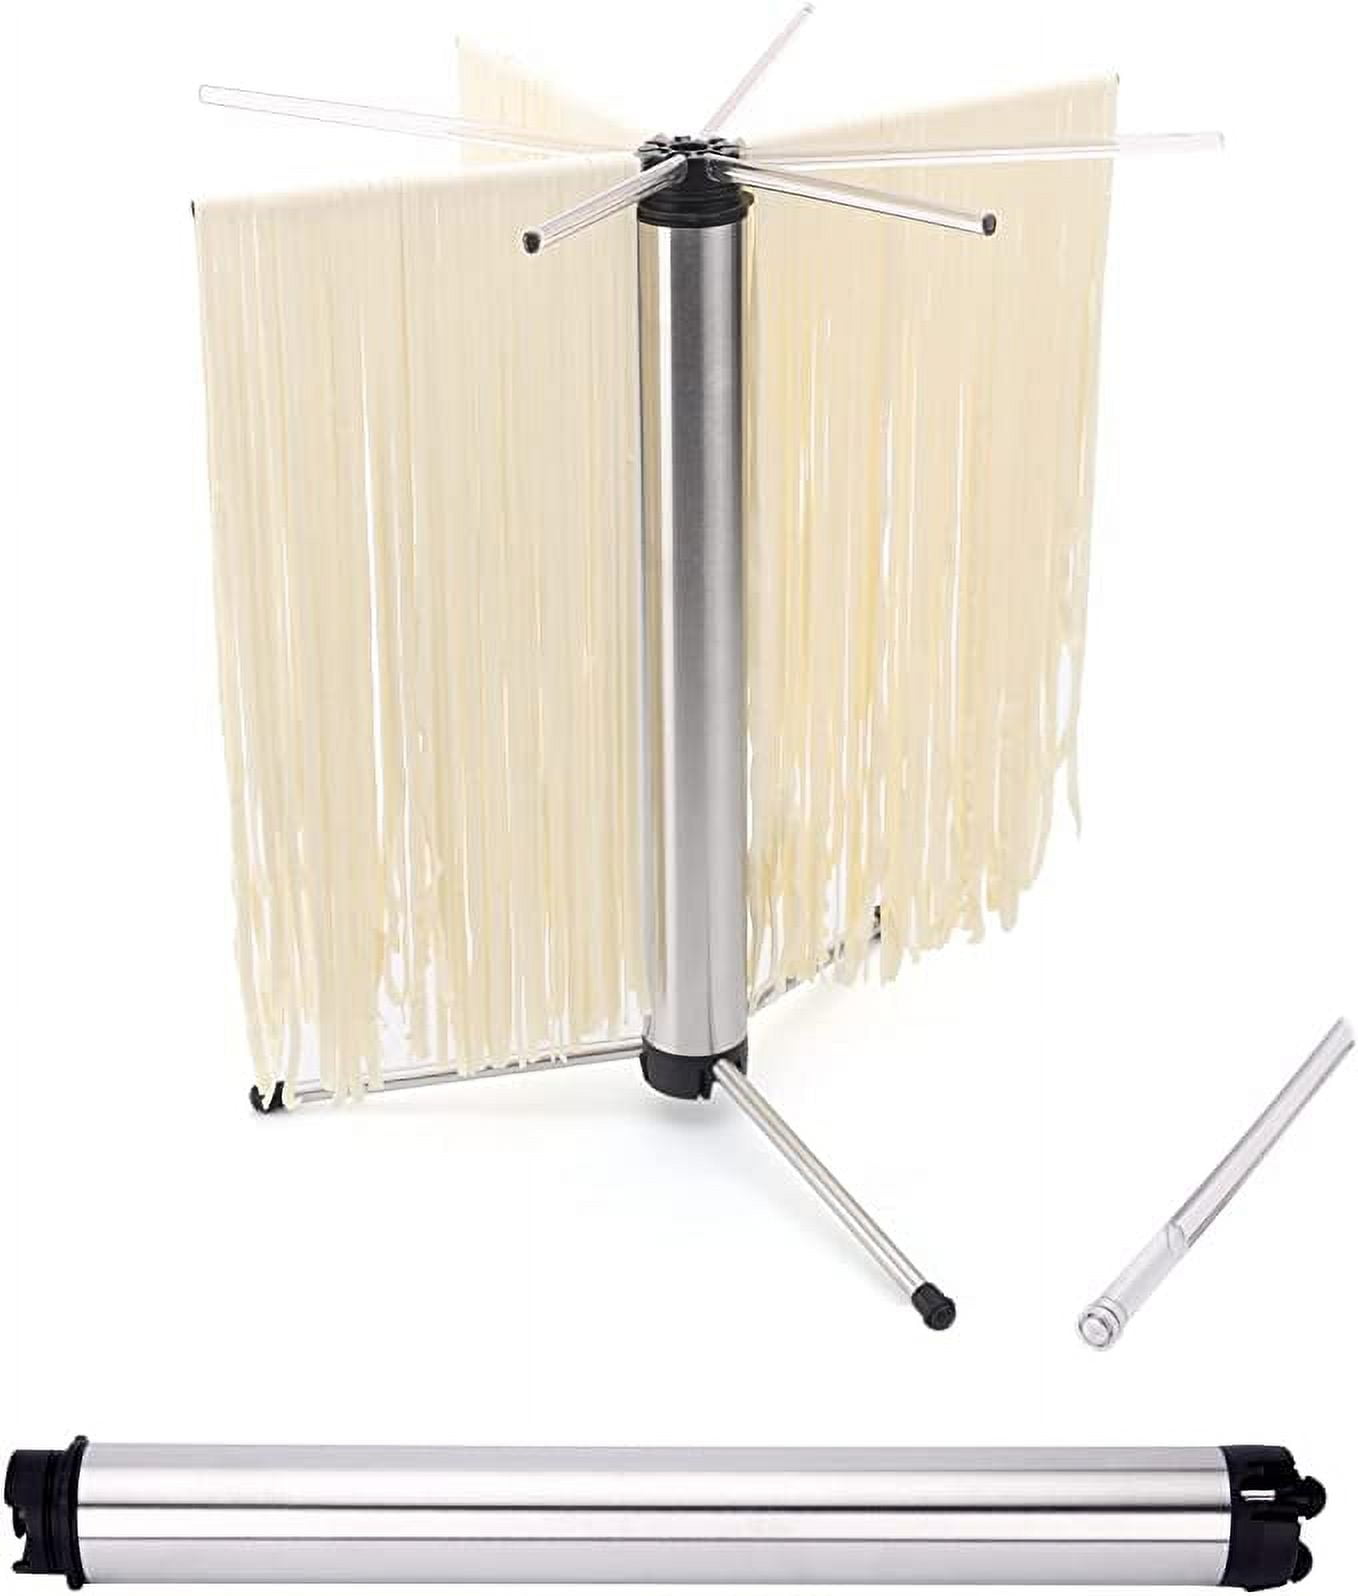 Ovente Collapsible Pasta Drying Rack, BPA-Free Acrylic Rods, ACPPA900C - Chrome